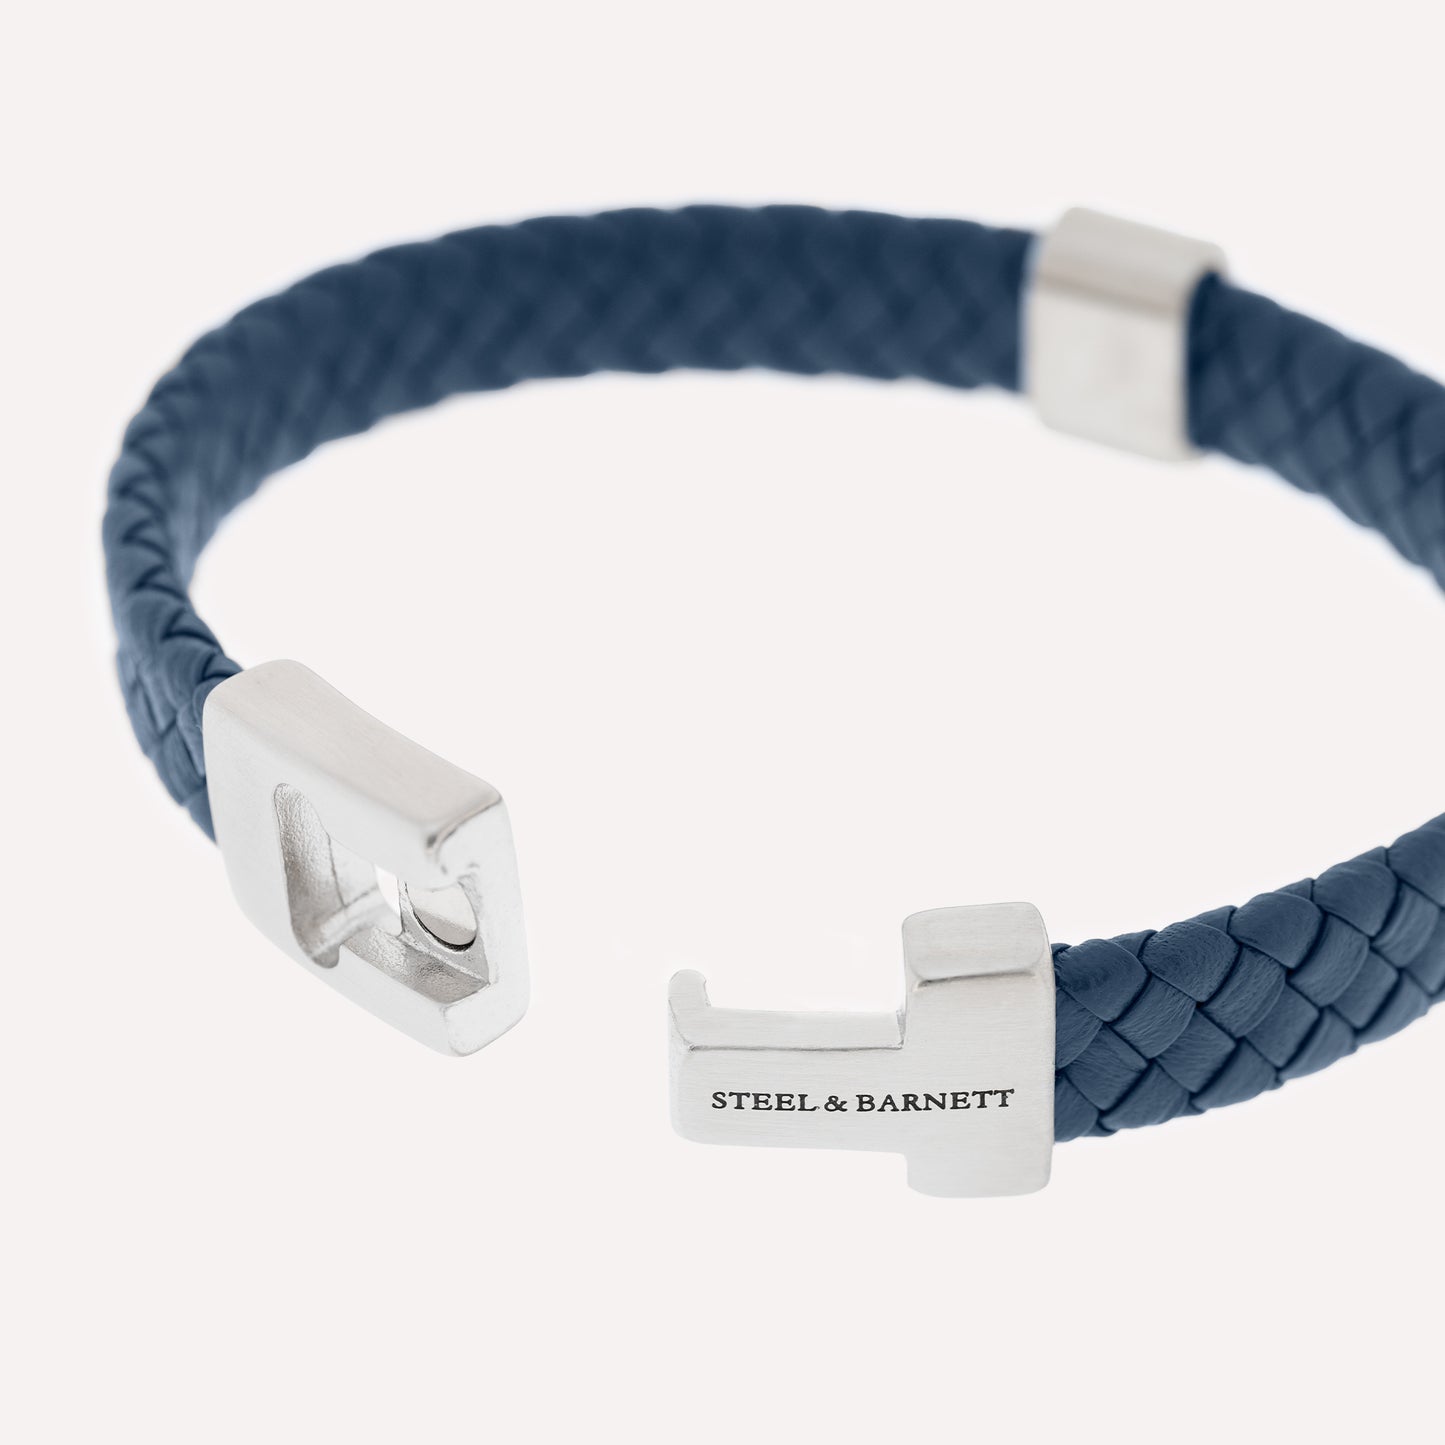 blue leather bracelet for men jewelry for him stainless steel clasp steel and barnettHarrison Nappa Leather Bracelet Blue